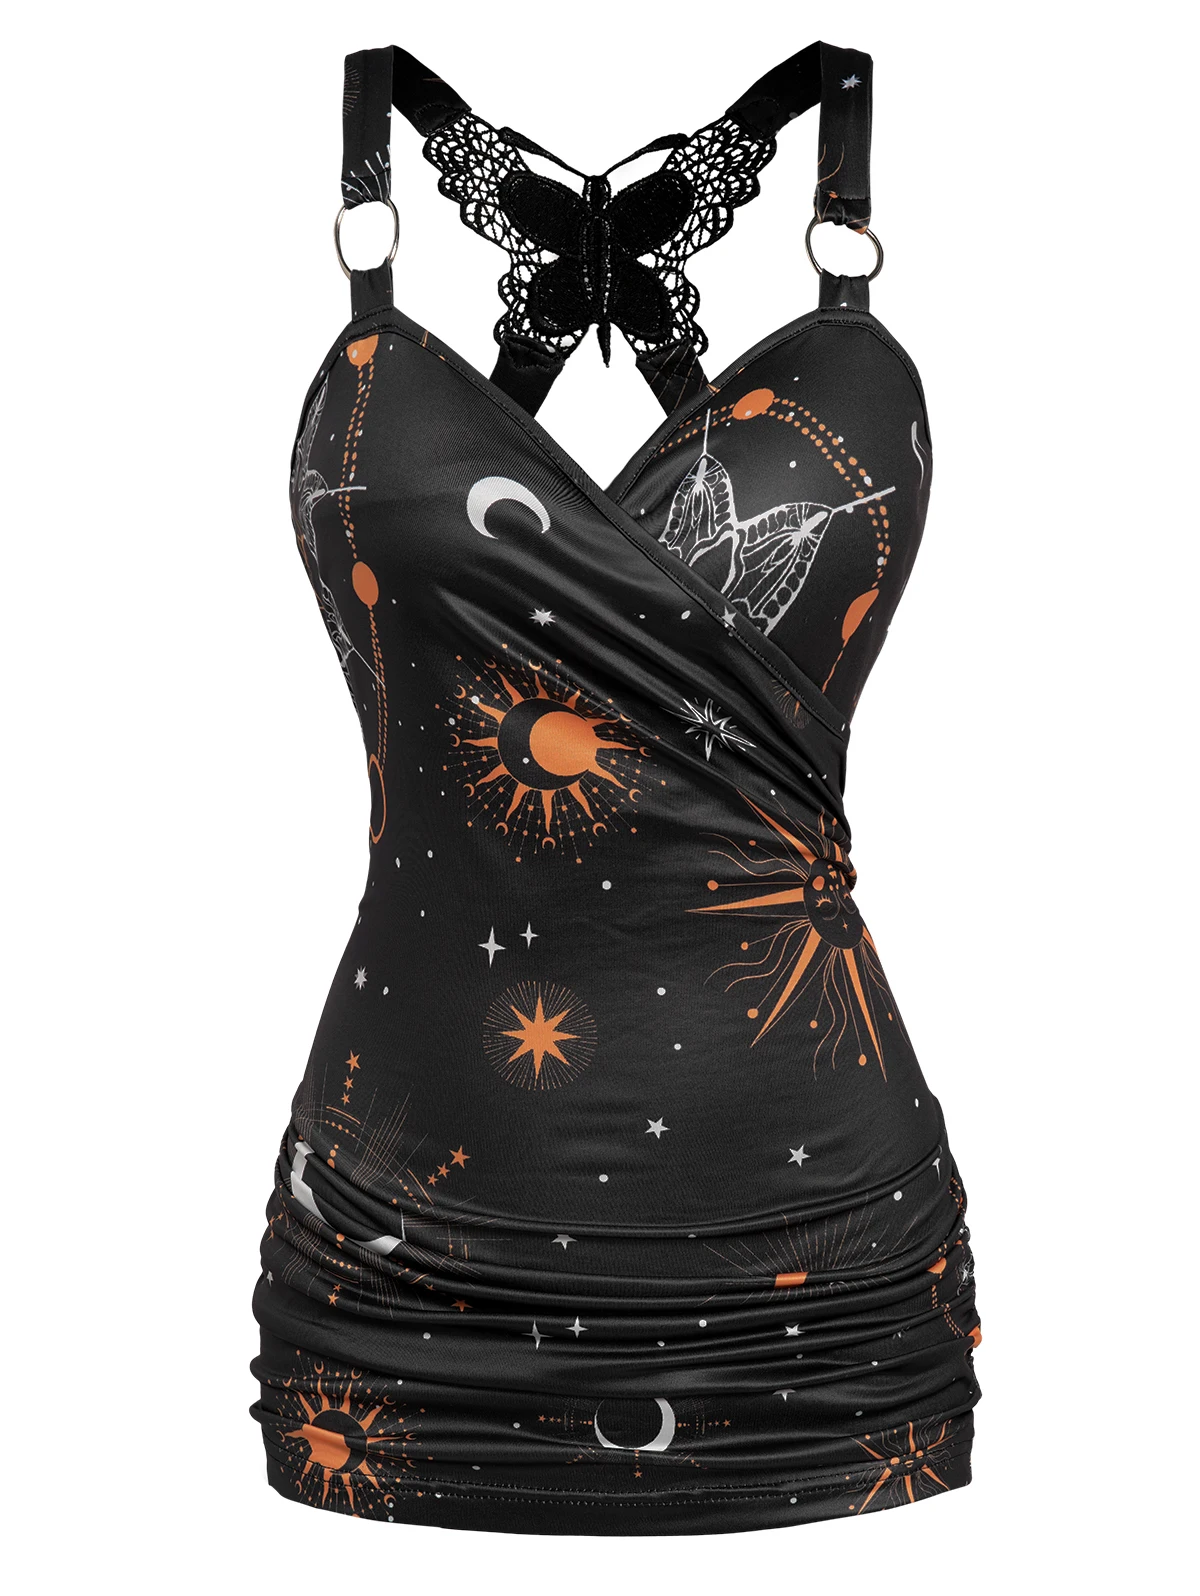 

Celestial Sun Moon Star Print Tank Top Women Summer Vest Butterfly Lace Insert Ruched Surplice O Ring Strap Caimsole